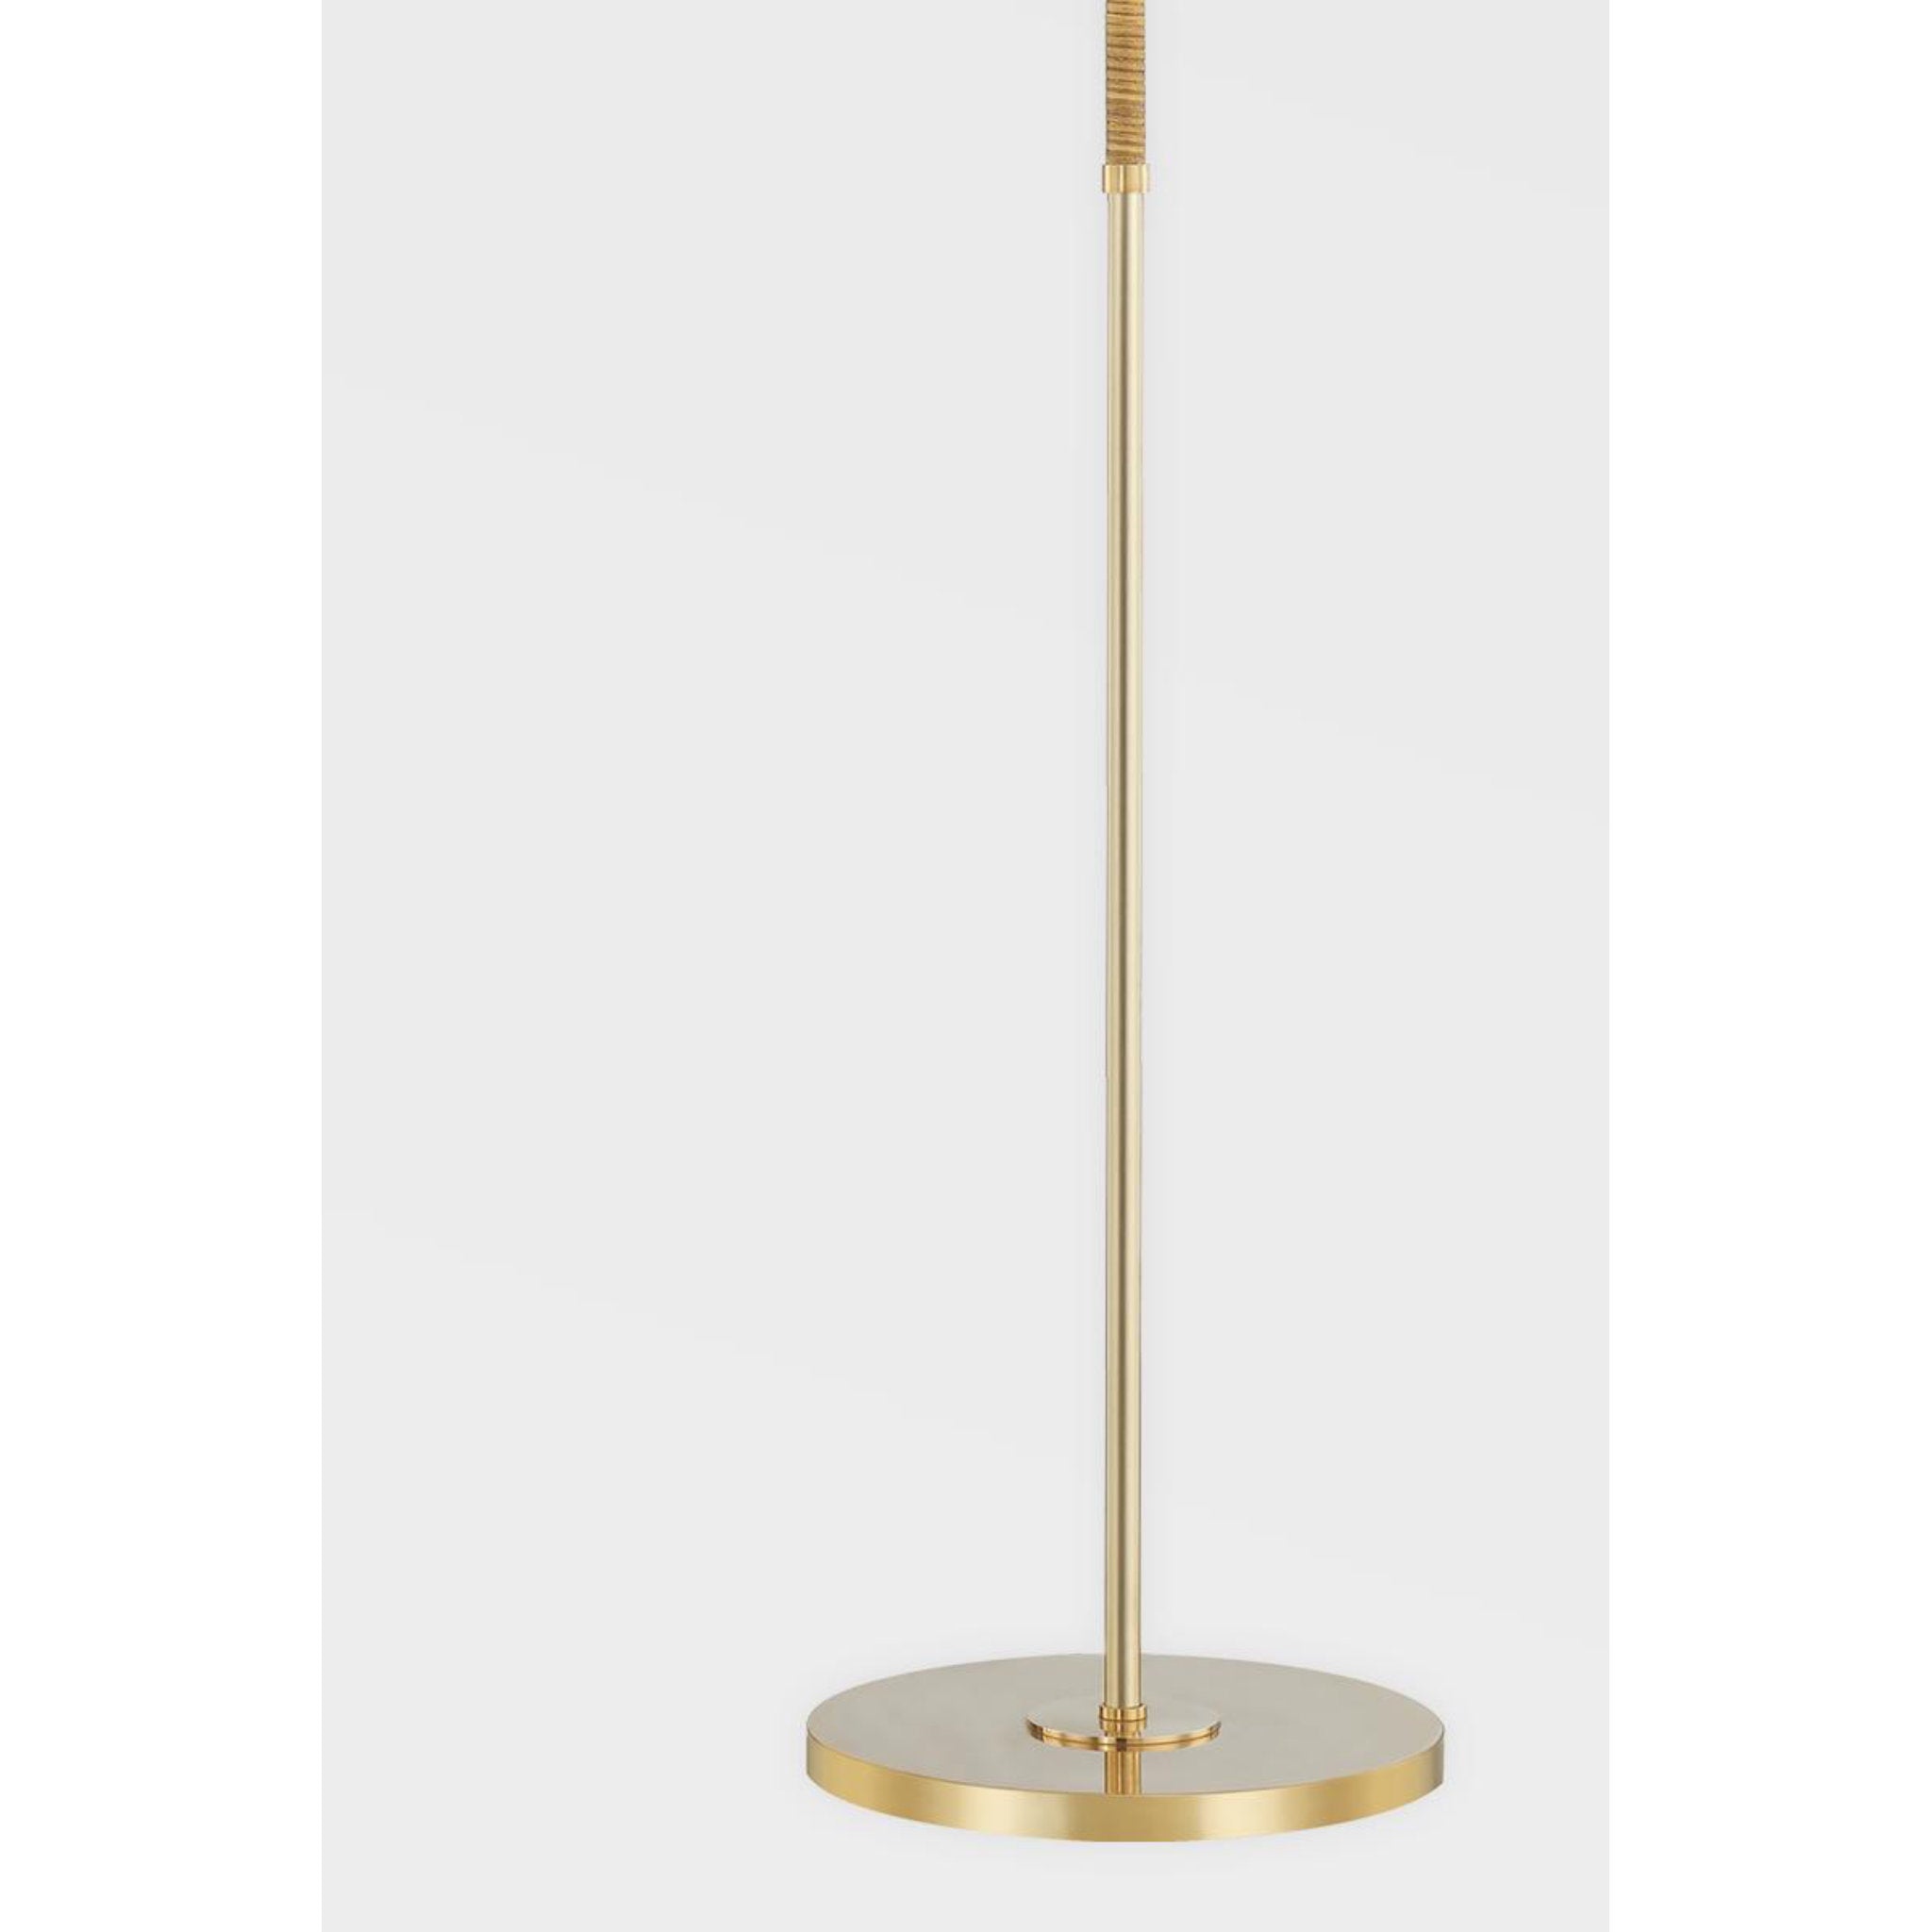 Dorset 1 Light Table Lamp in Aged Brass by Mark D. Sikes